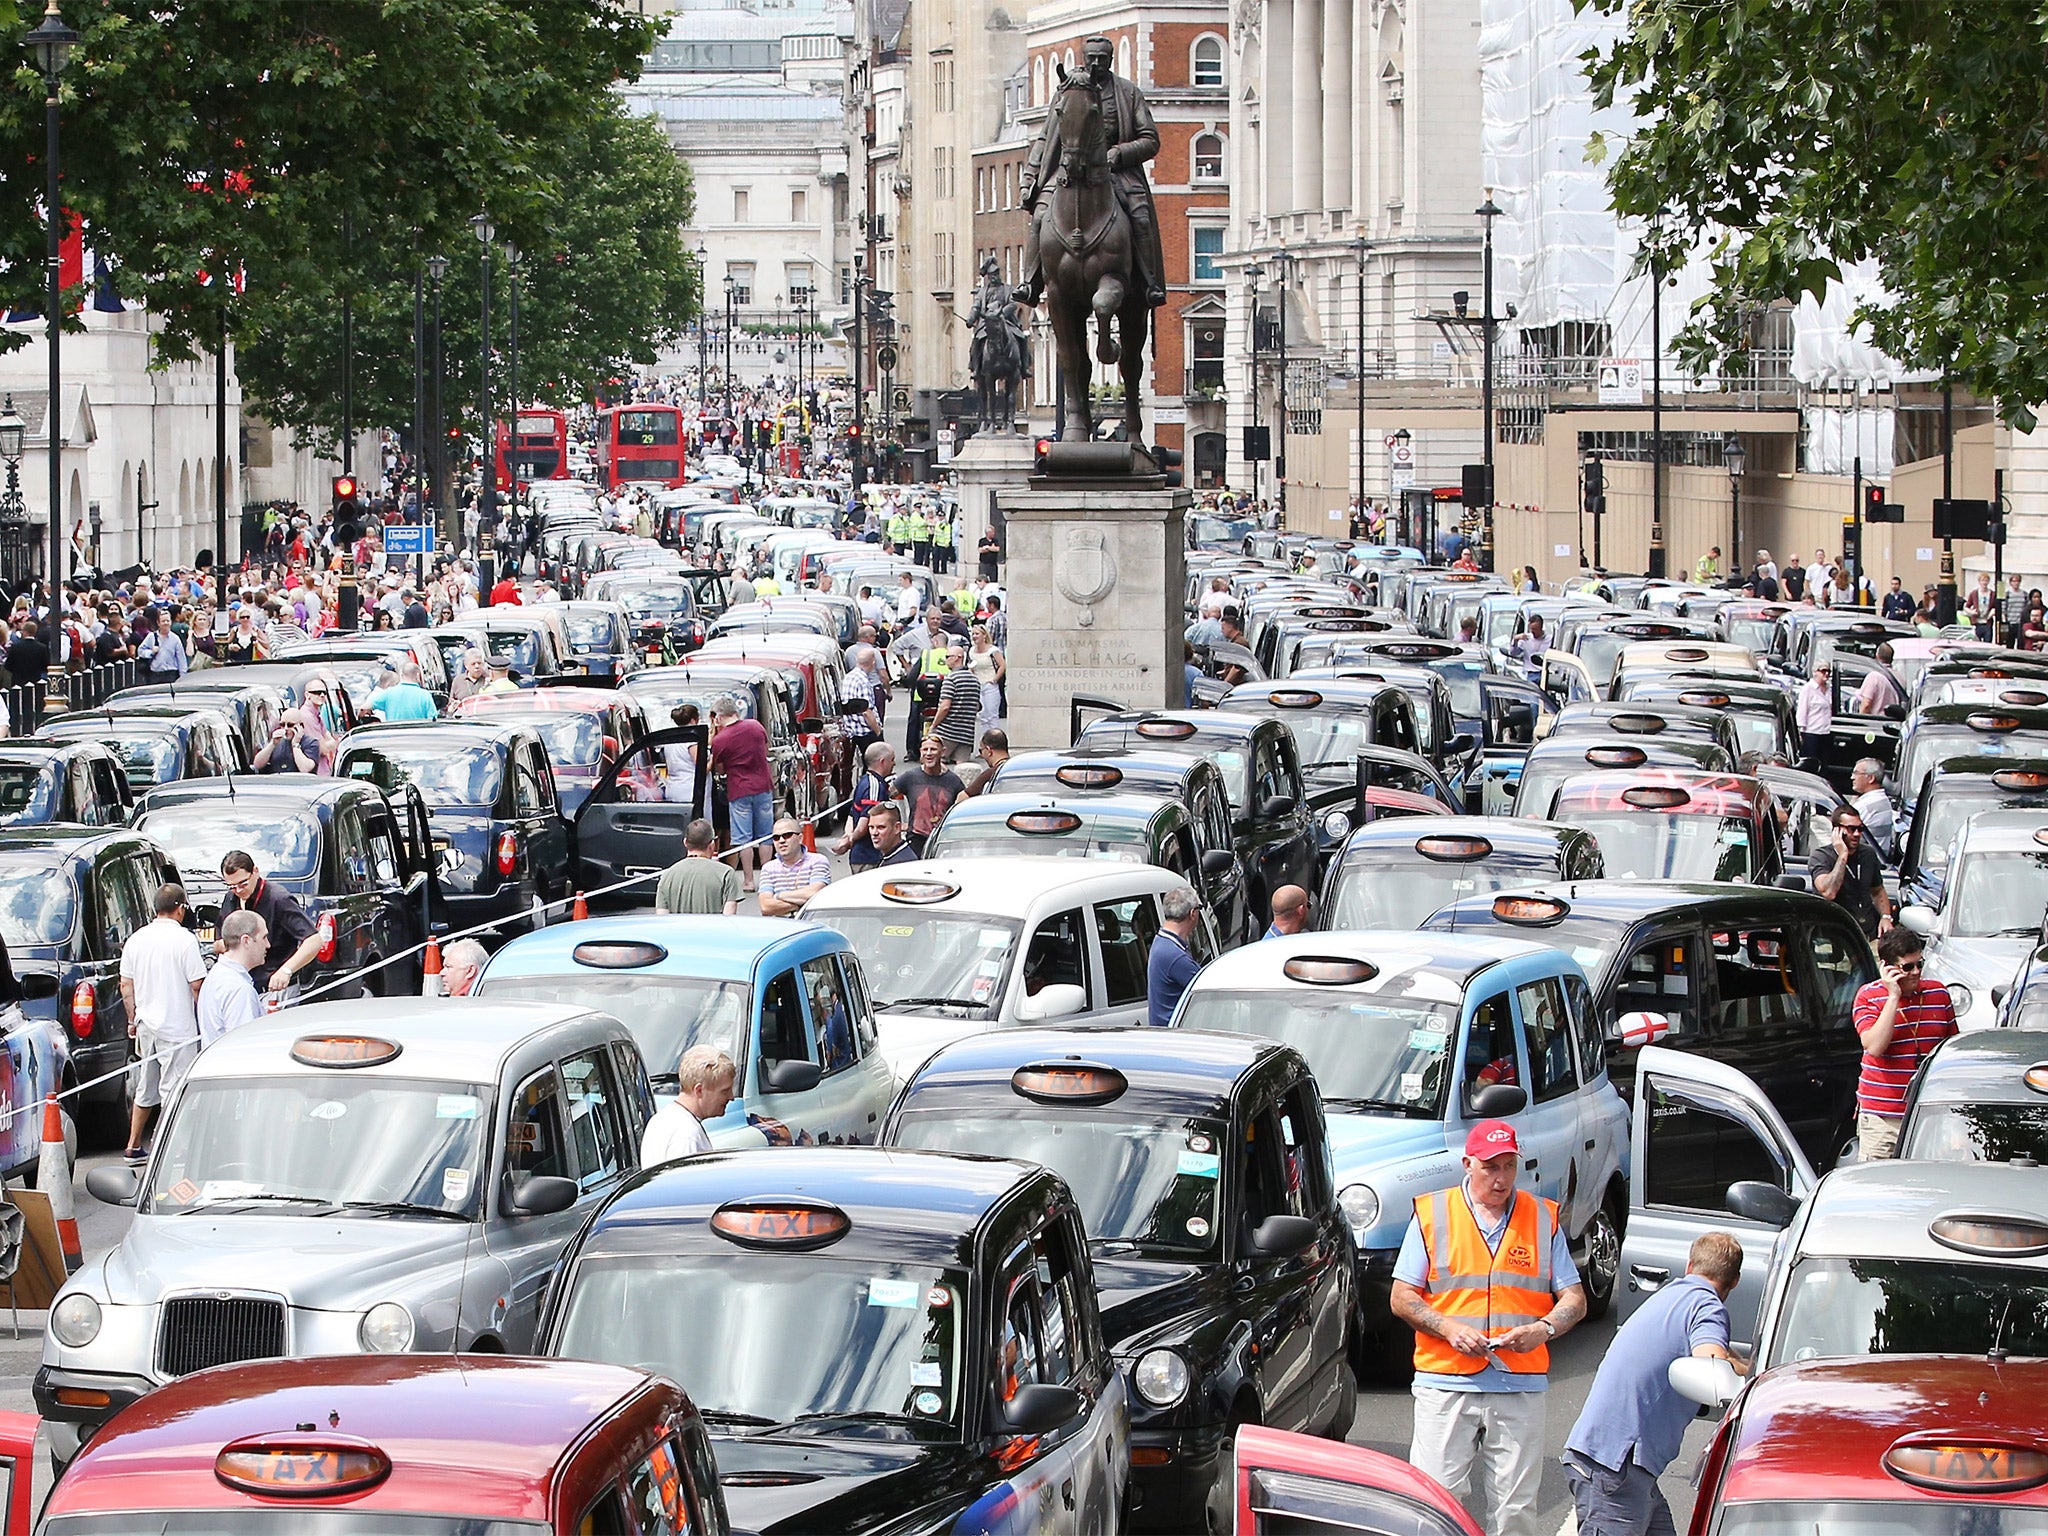 Black cab and licensed taxi drivers protested at Trafalgar Square in June last year over the launch of the phone app Uber